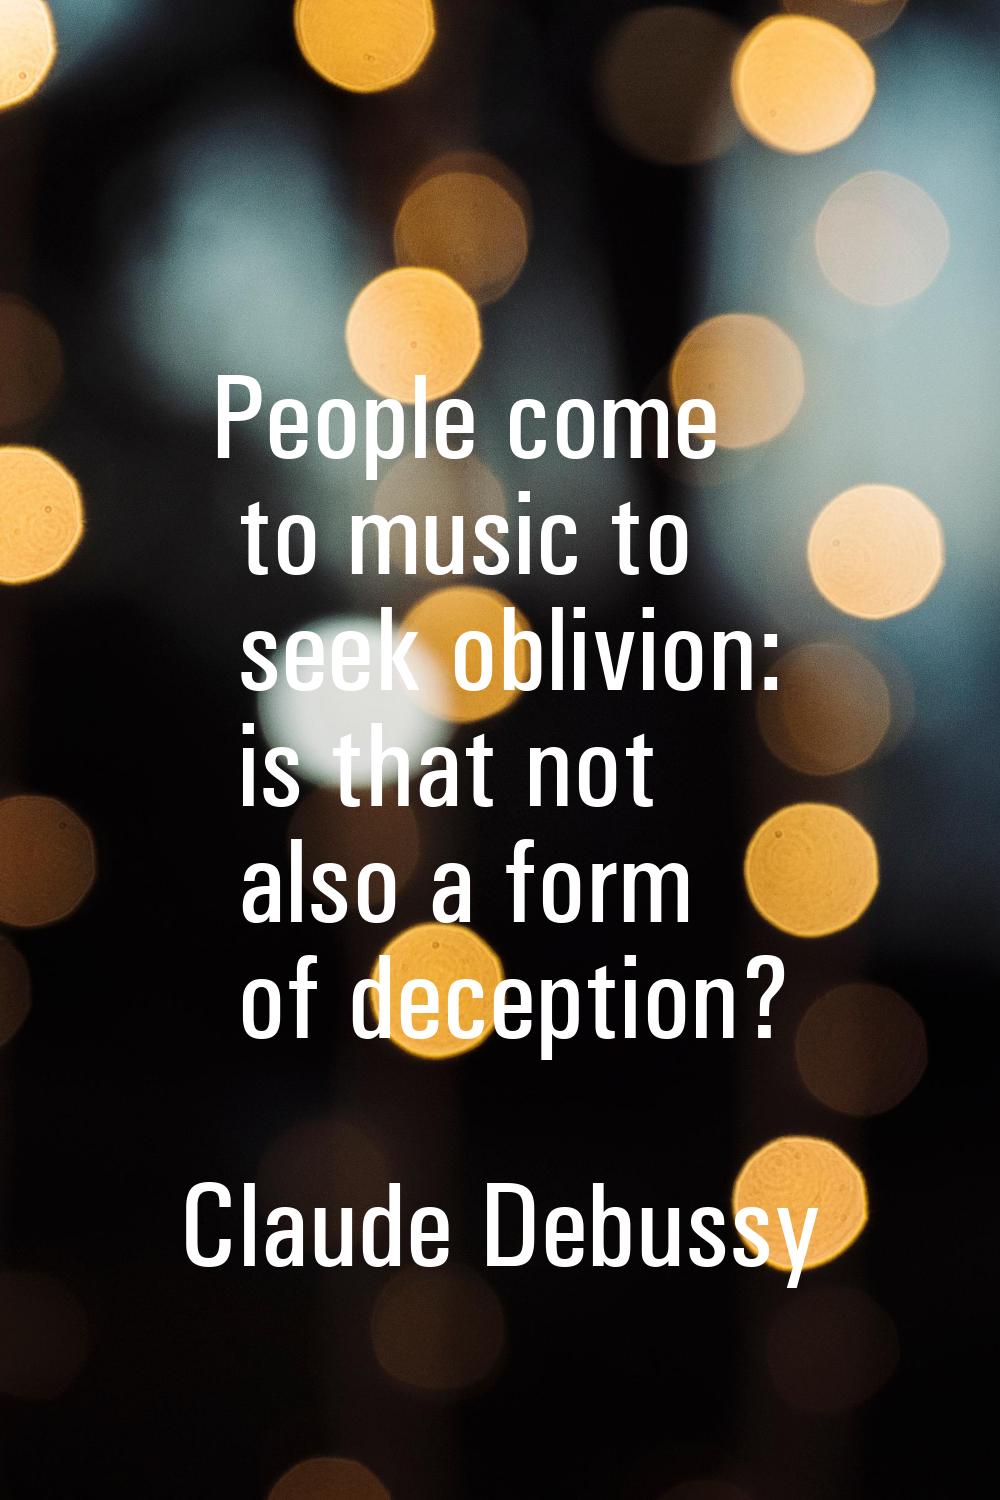 People come to music to seek oblivion: is that not also a form of deception?